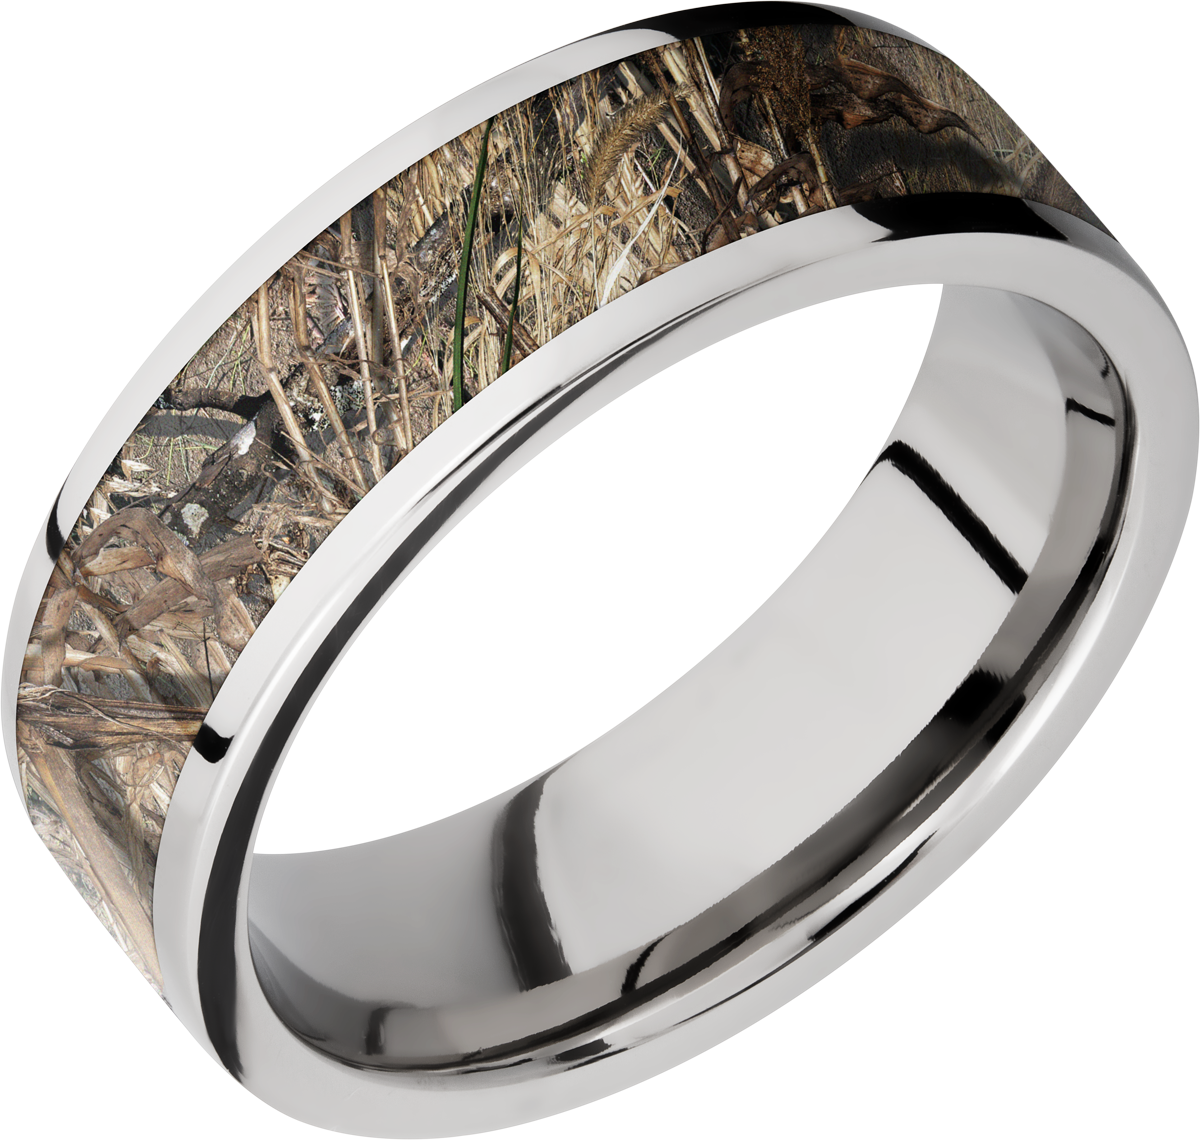 Cobalt chrome 7mm flat band with one inlay that is 5mm wide of a mosaic pattern. BLACK DINO